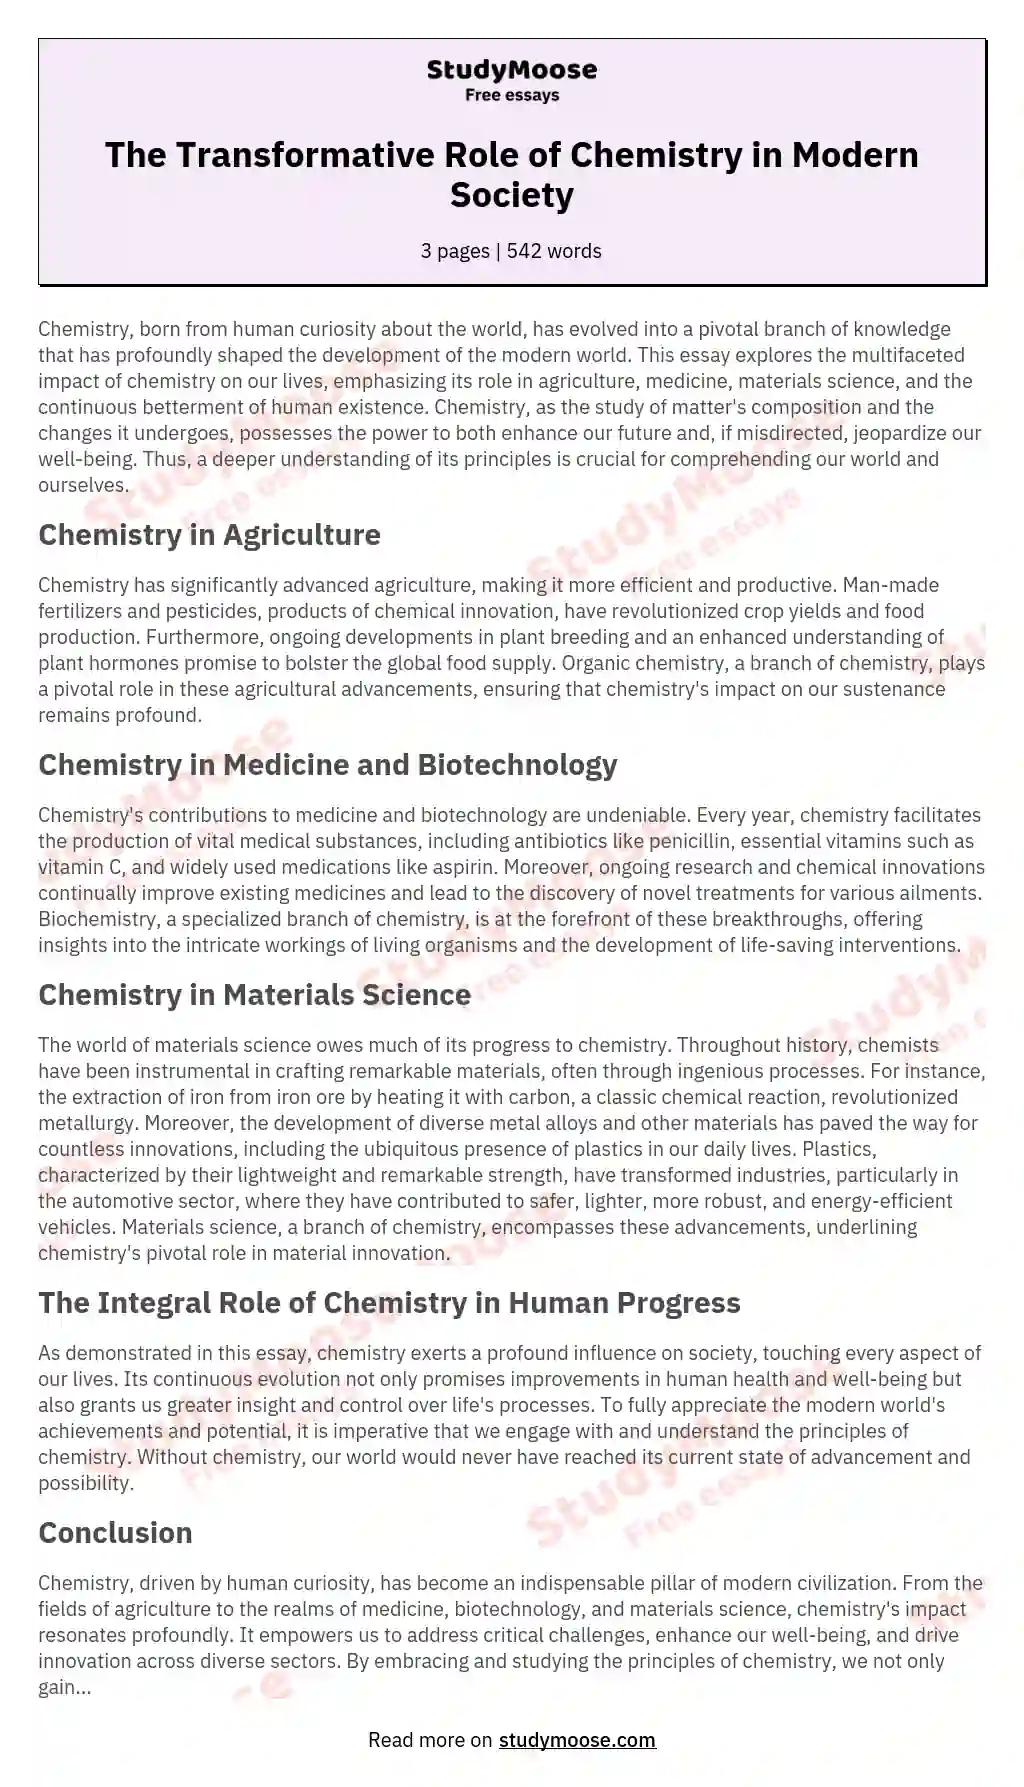 The Transformative Role of Chemistry in Modern Society essay